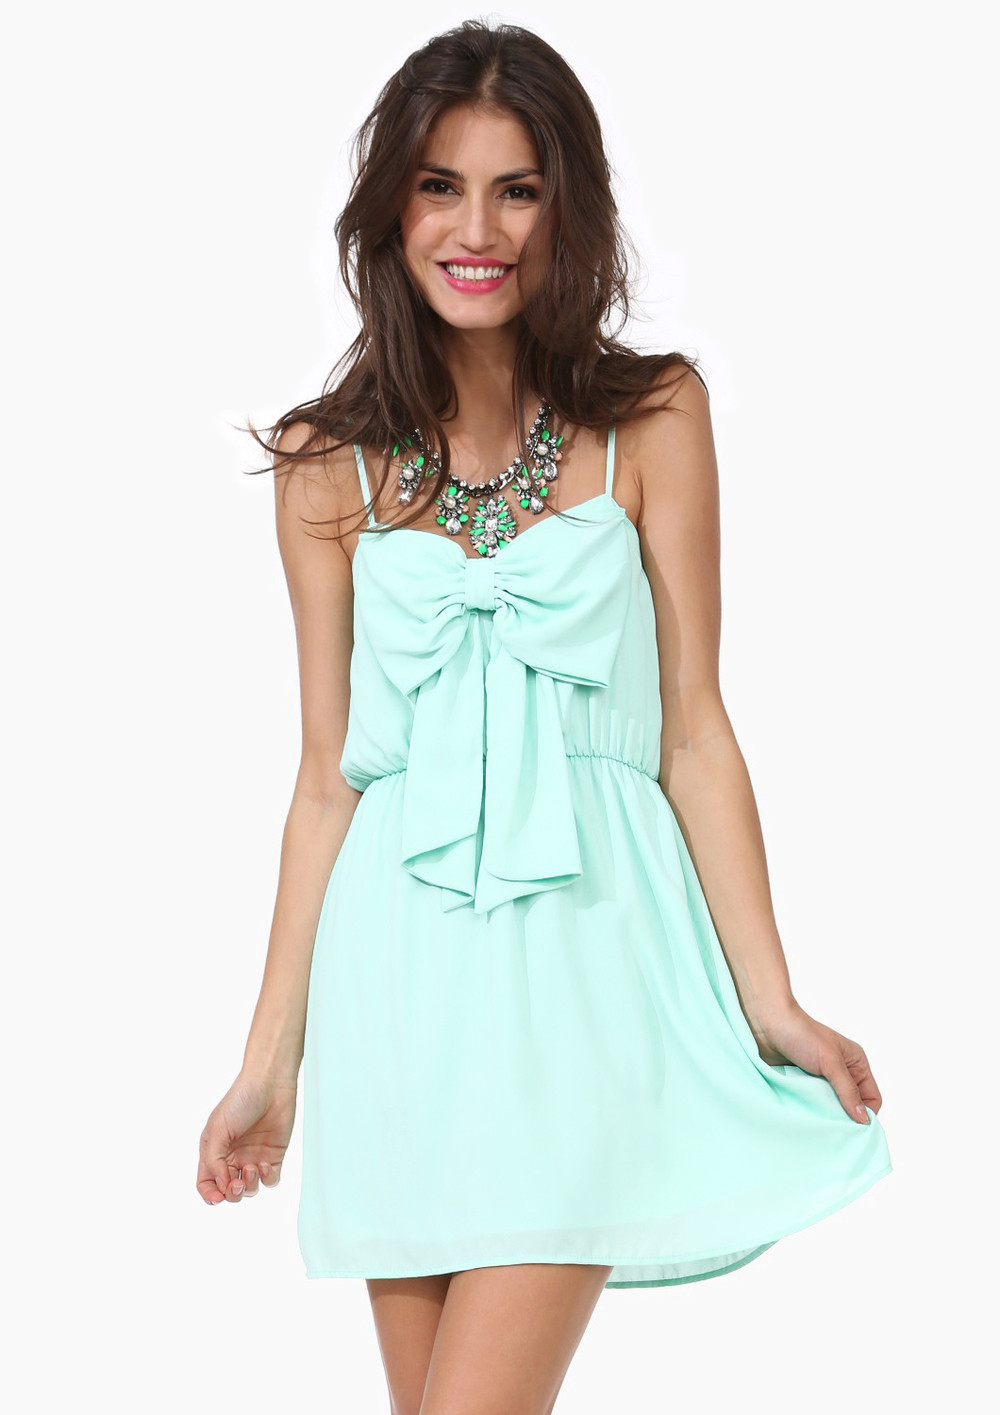 PURE COLOR BOWKNOT FASHION DRESS on Luulla